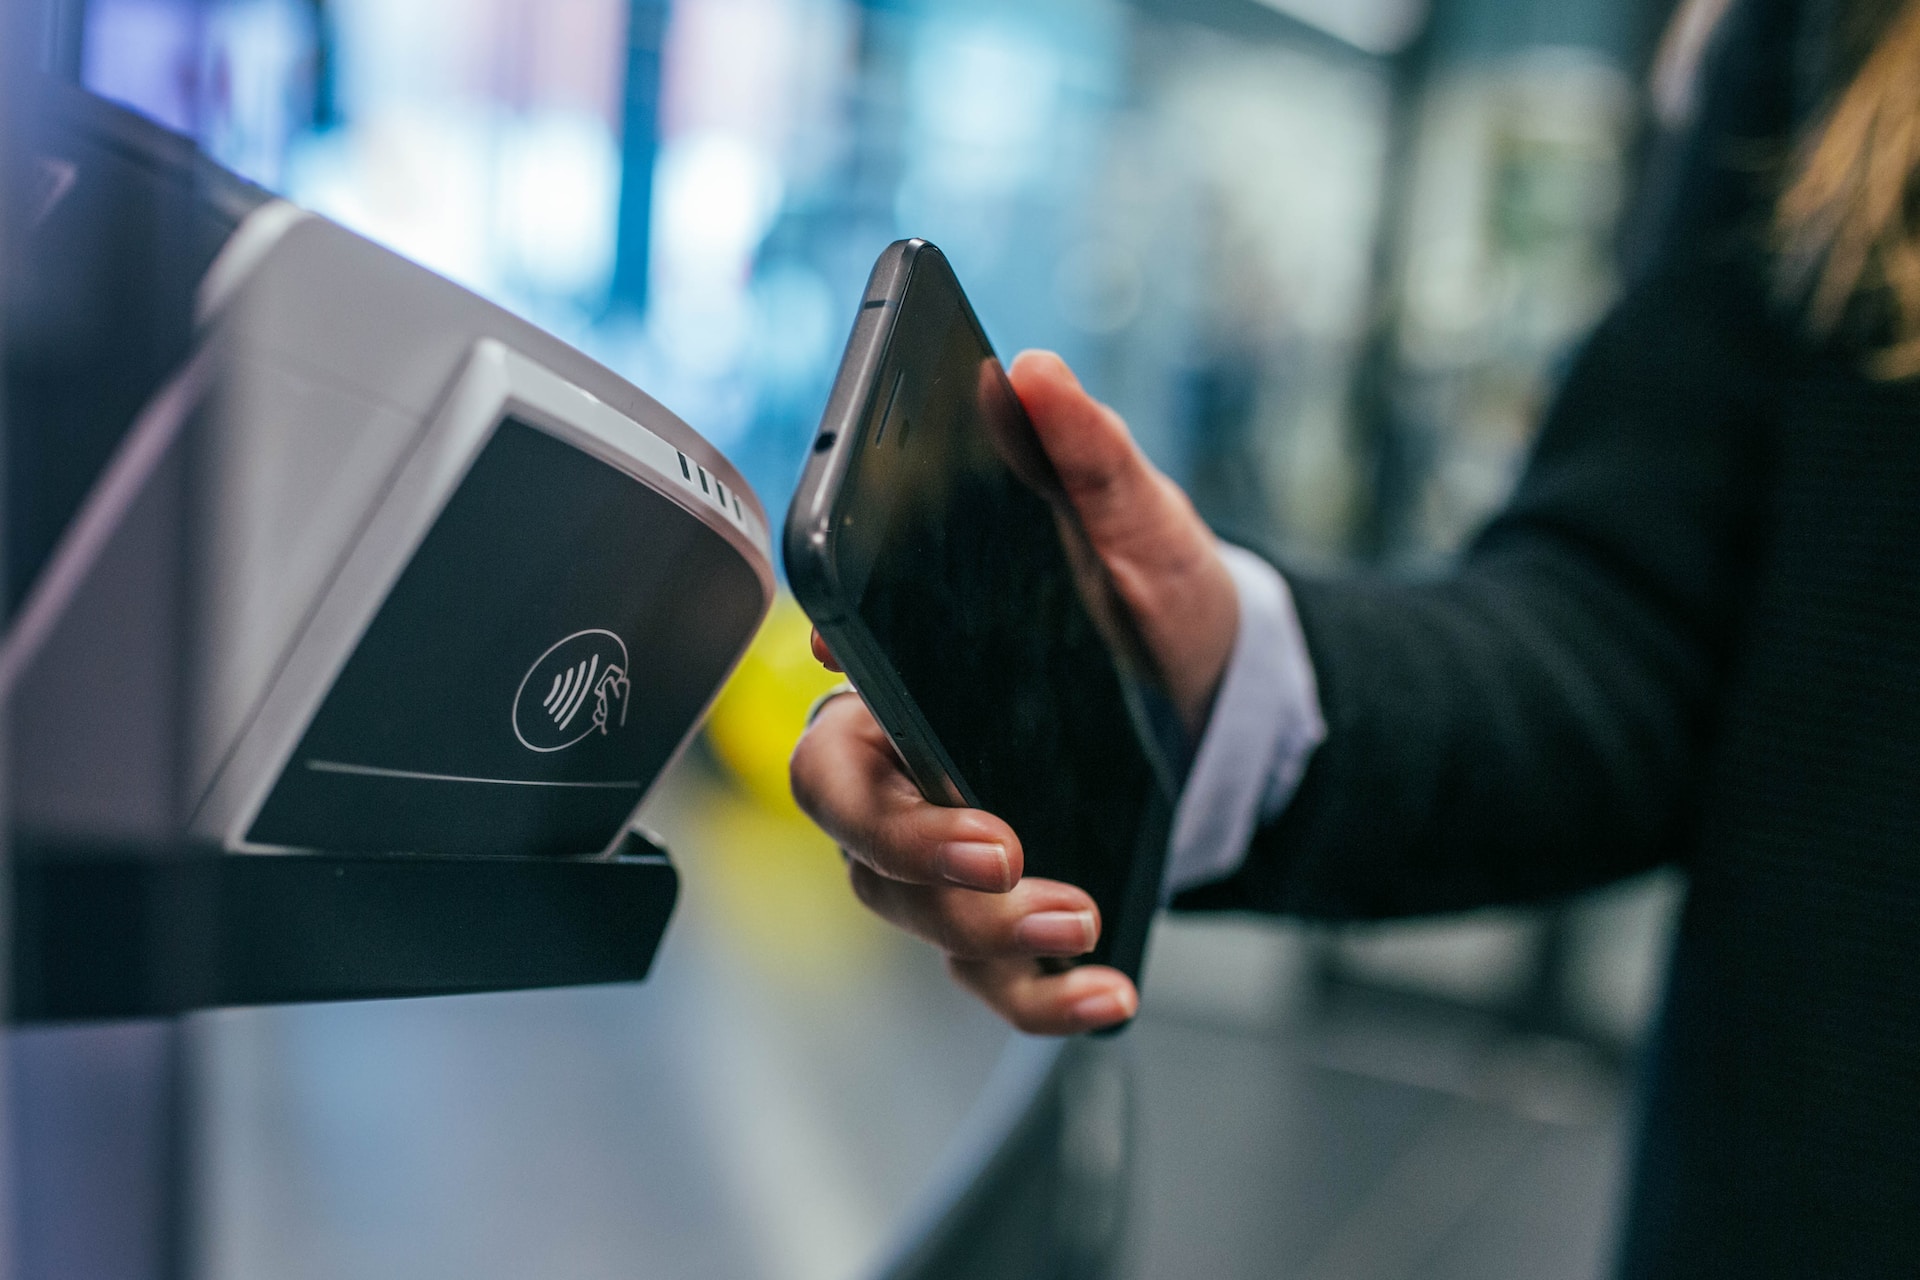 How NFC is fast becoming the superior alternative to QR codes